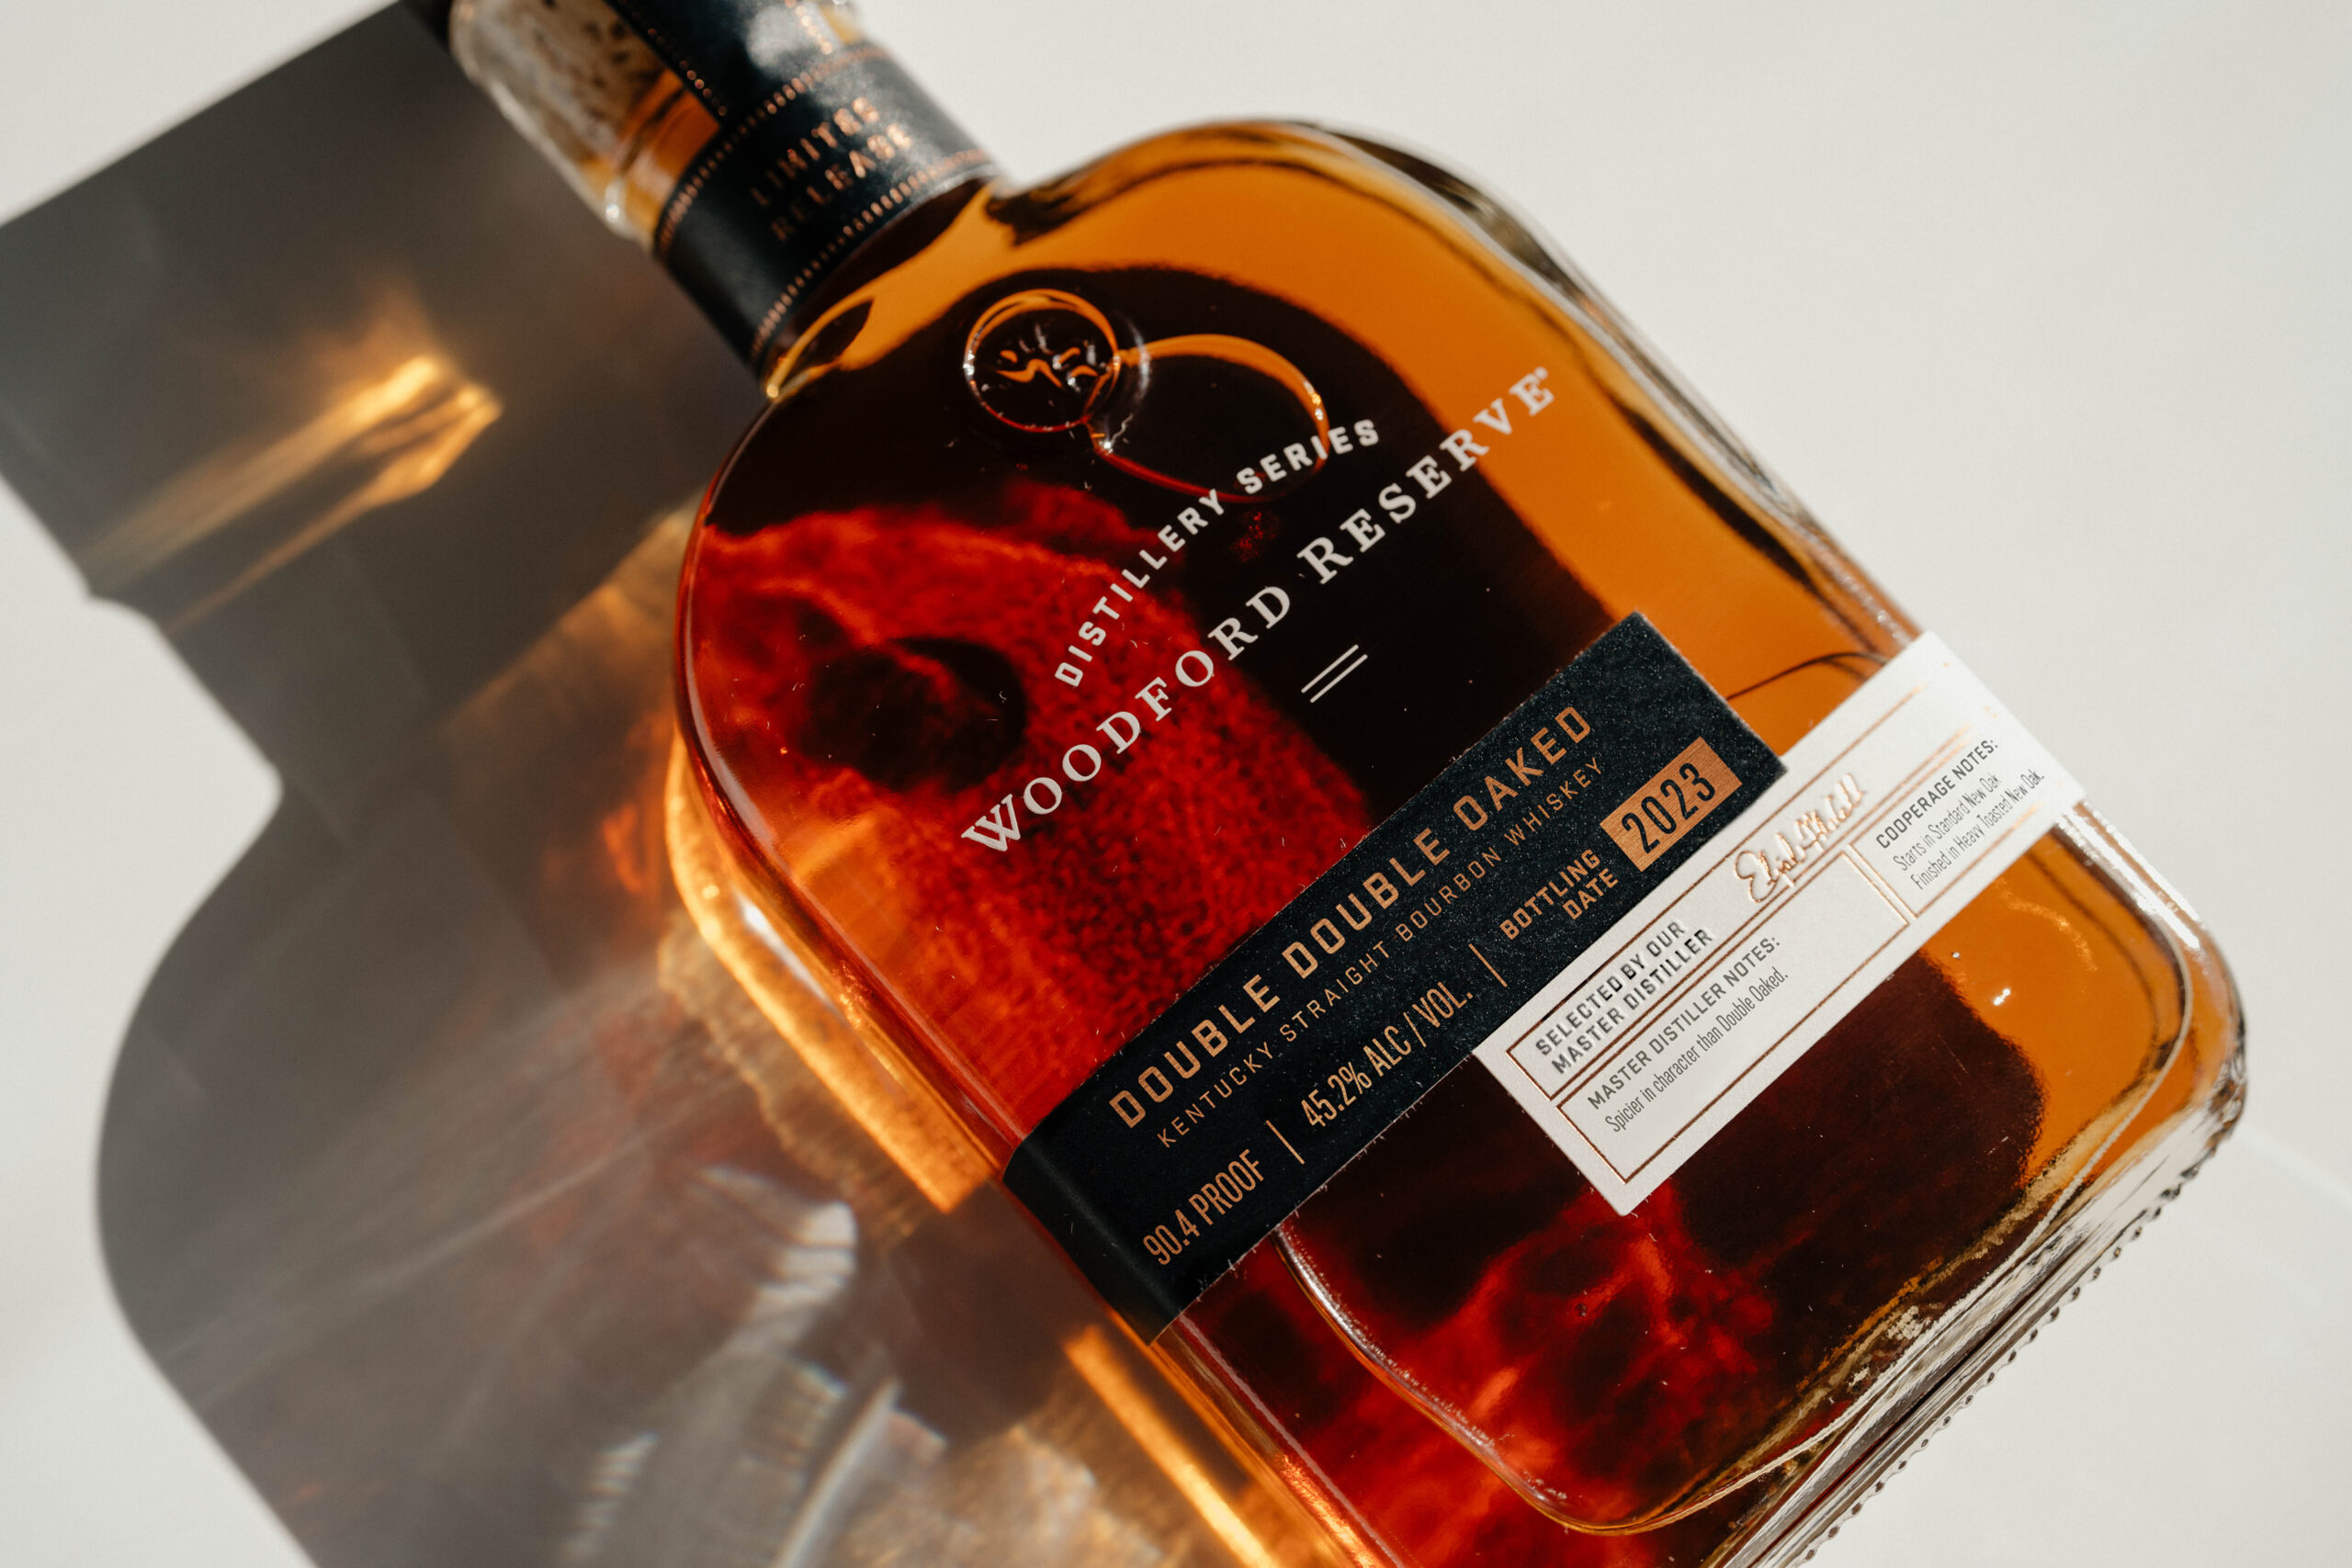 New “Double Double Oaked” Bourbon Released at Woodford Reserve Today